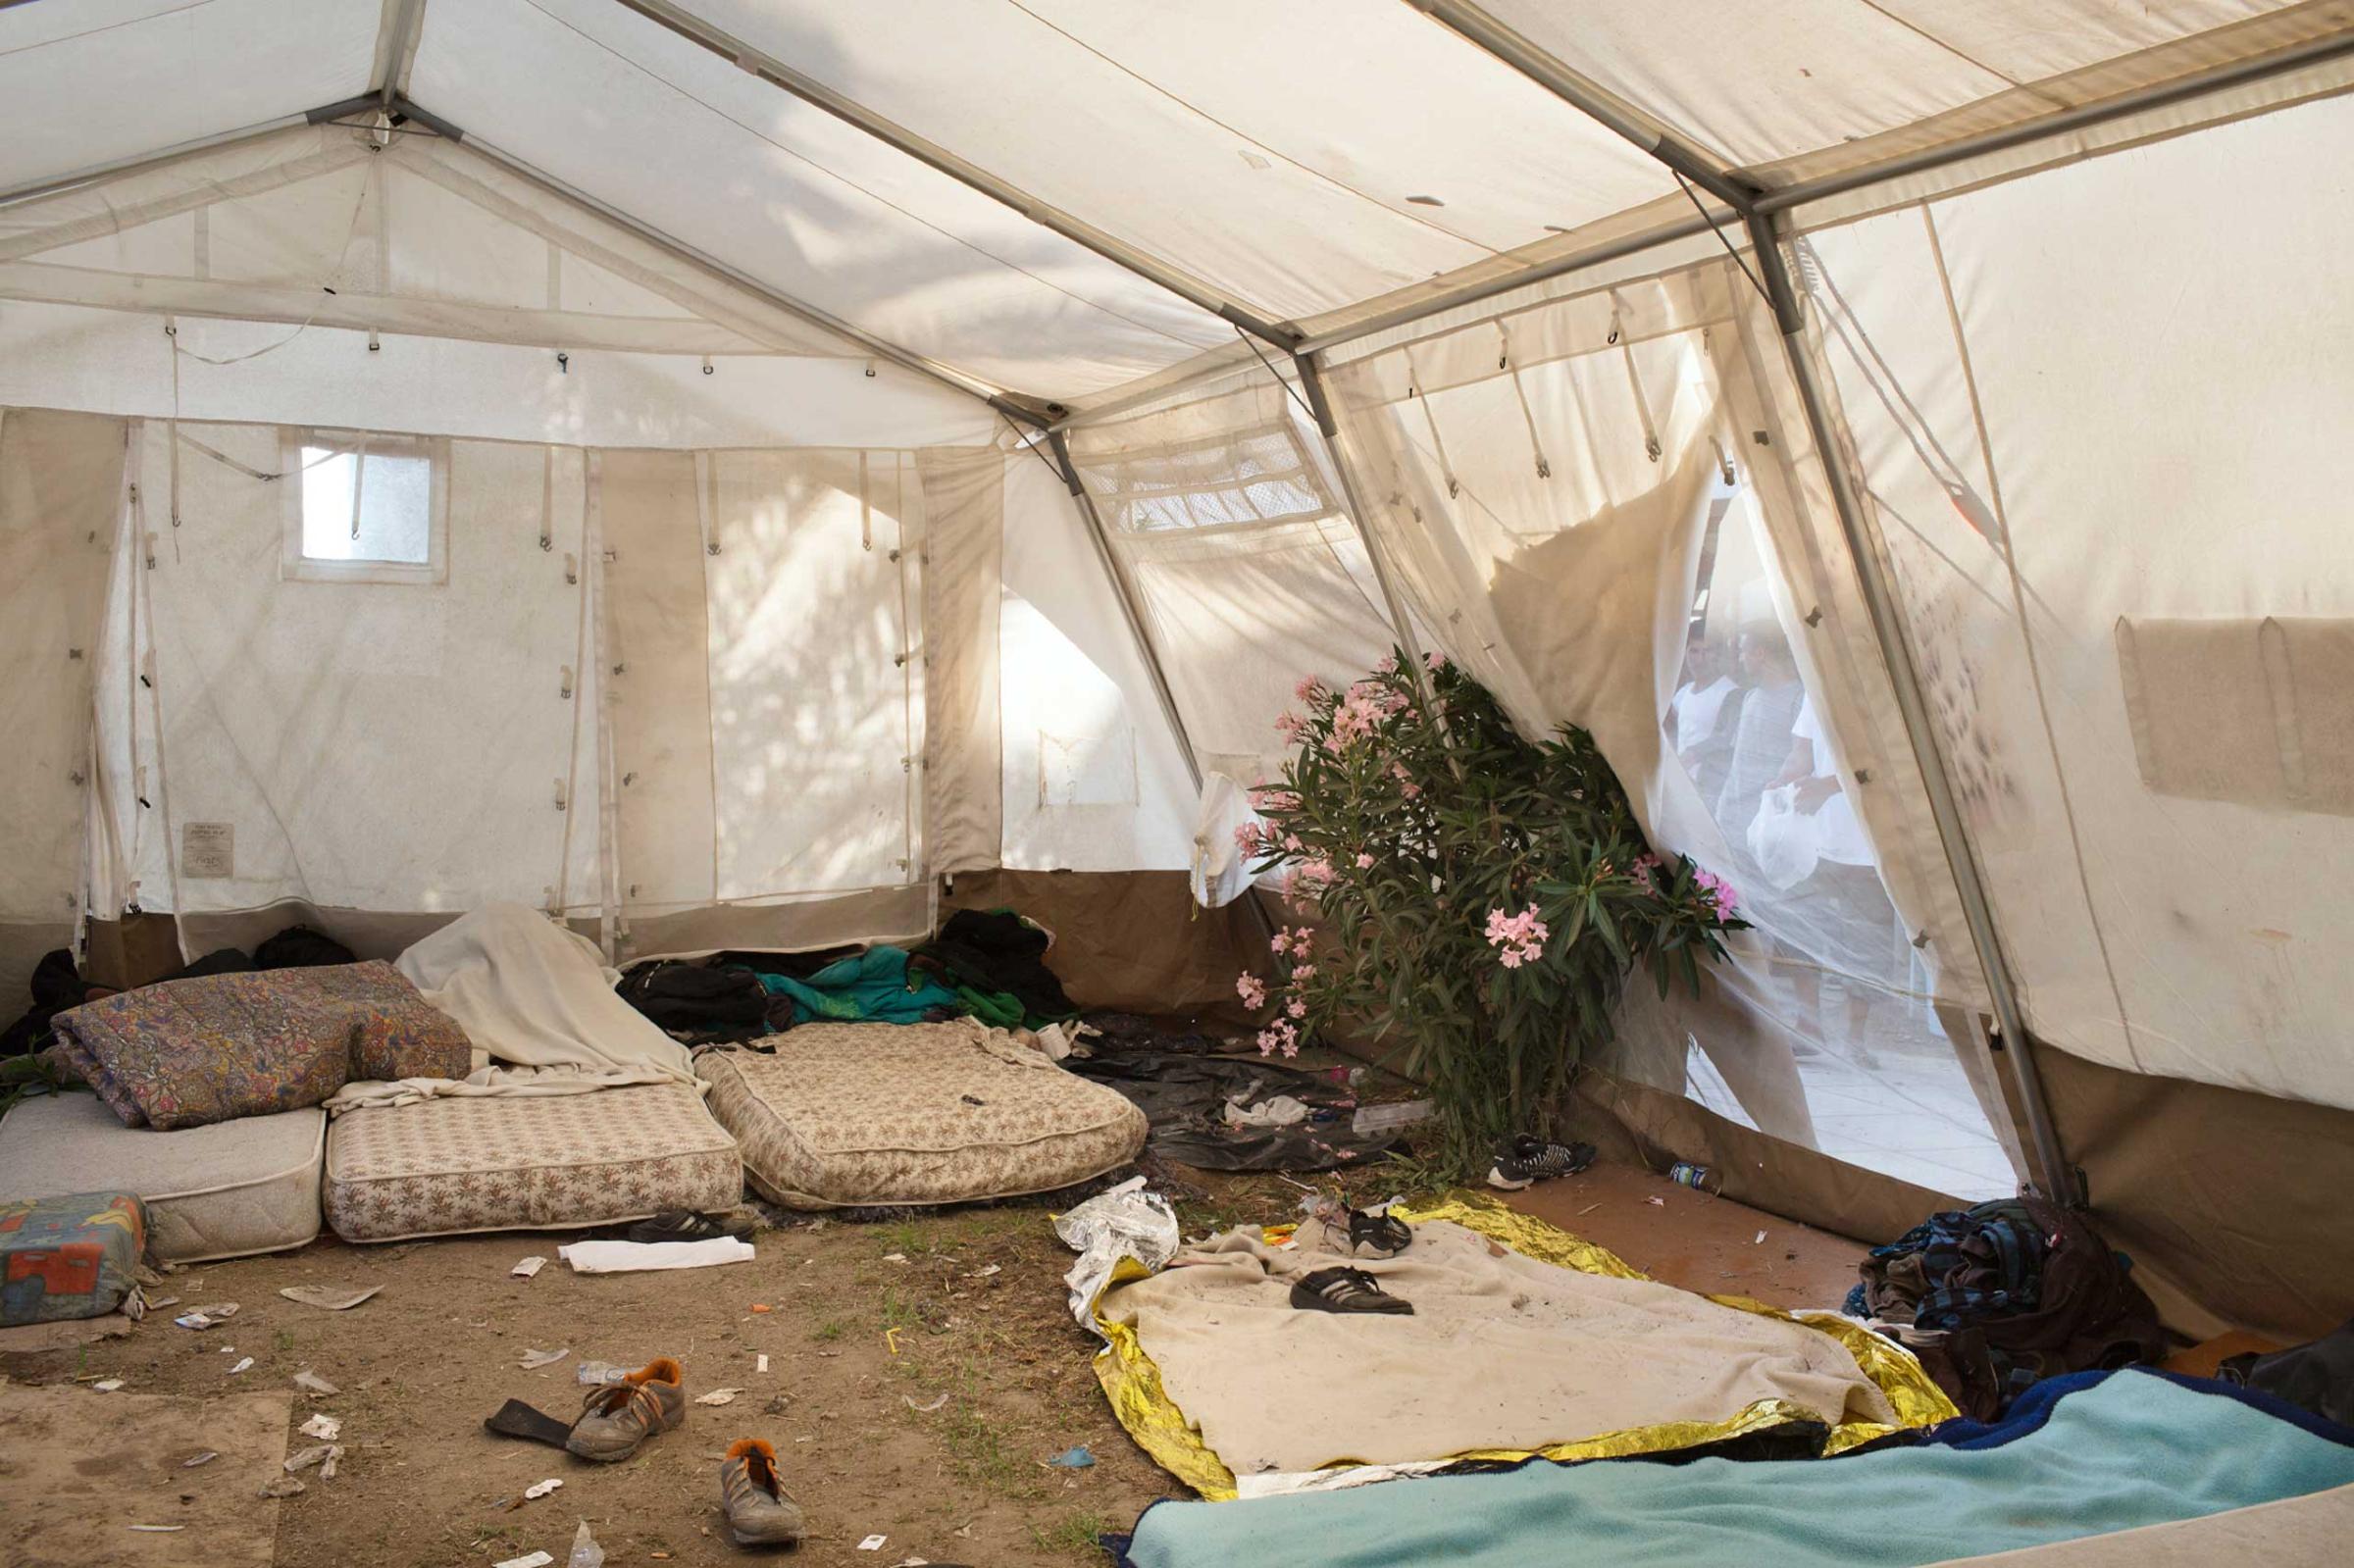 The interior of a tent set up for refugees in the courtyard of an abandoned hotel on the Greek island of Kos, June 8, 2015. Doctors Without Borders' staff worked inside the hotel to improve conditions and provide medical and psychological assistance for the arriving migrants.